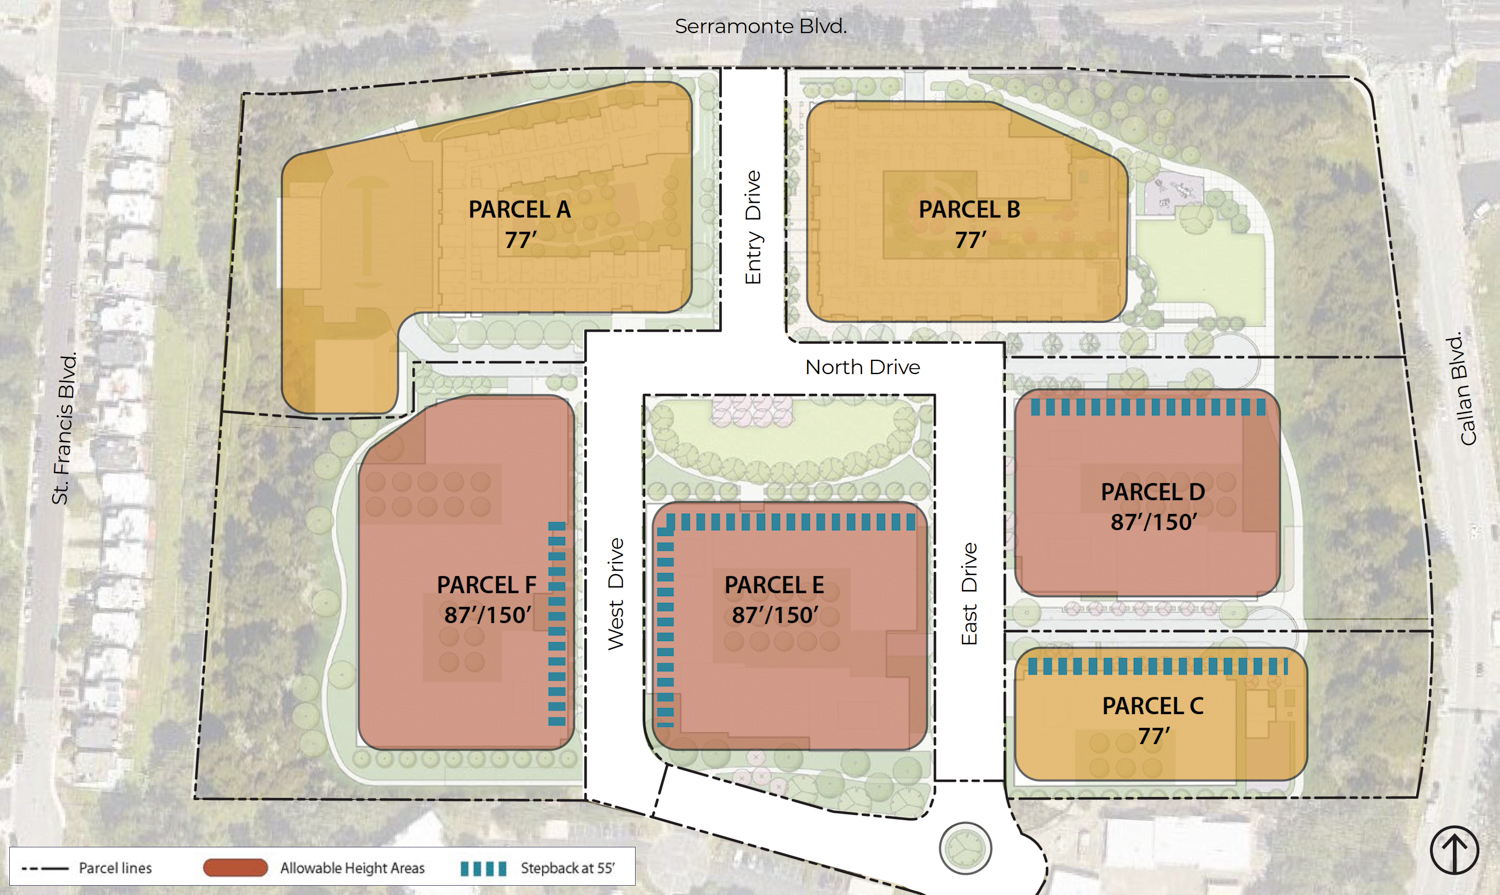 Serramonte Del Rey parcel projected height limits, illustration via Draft EIR by Placeworks